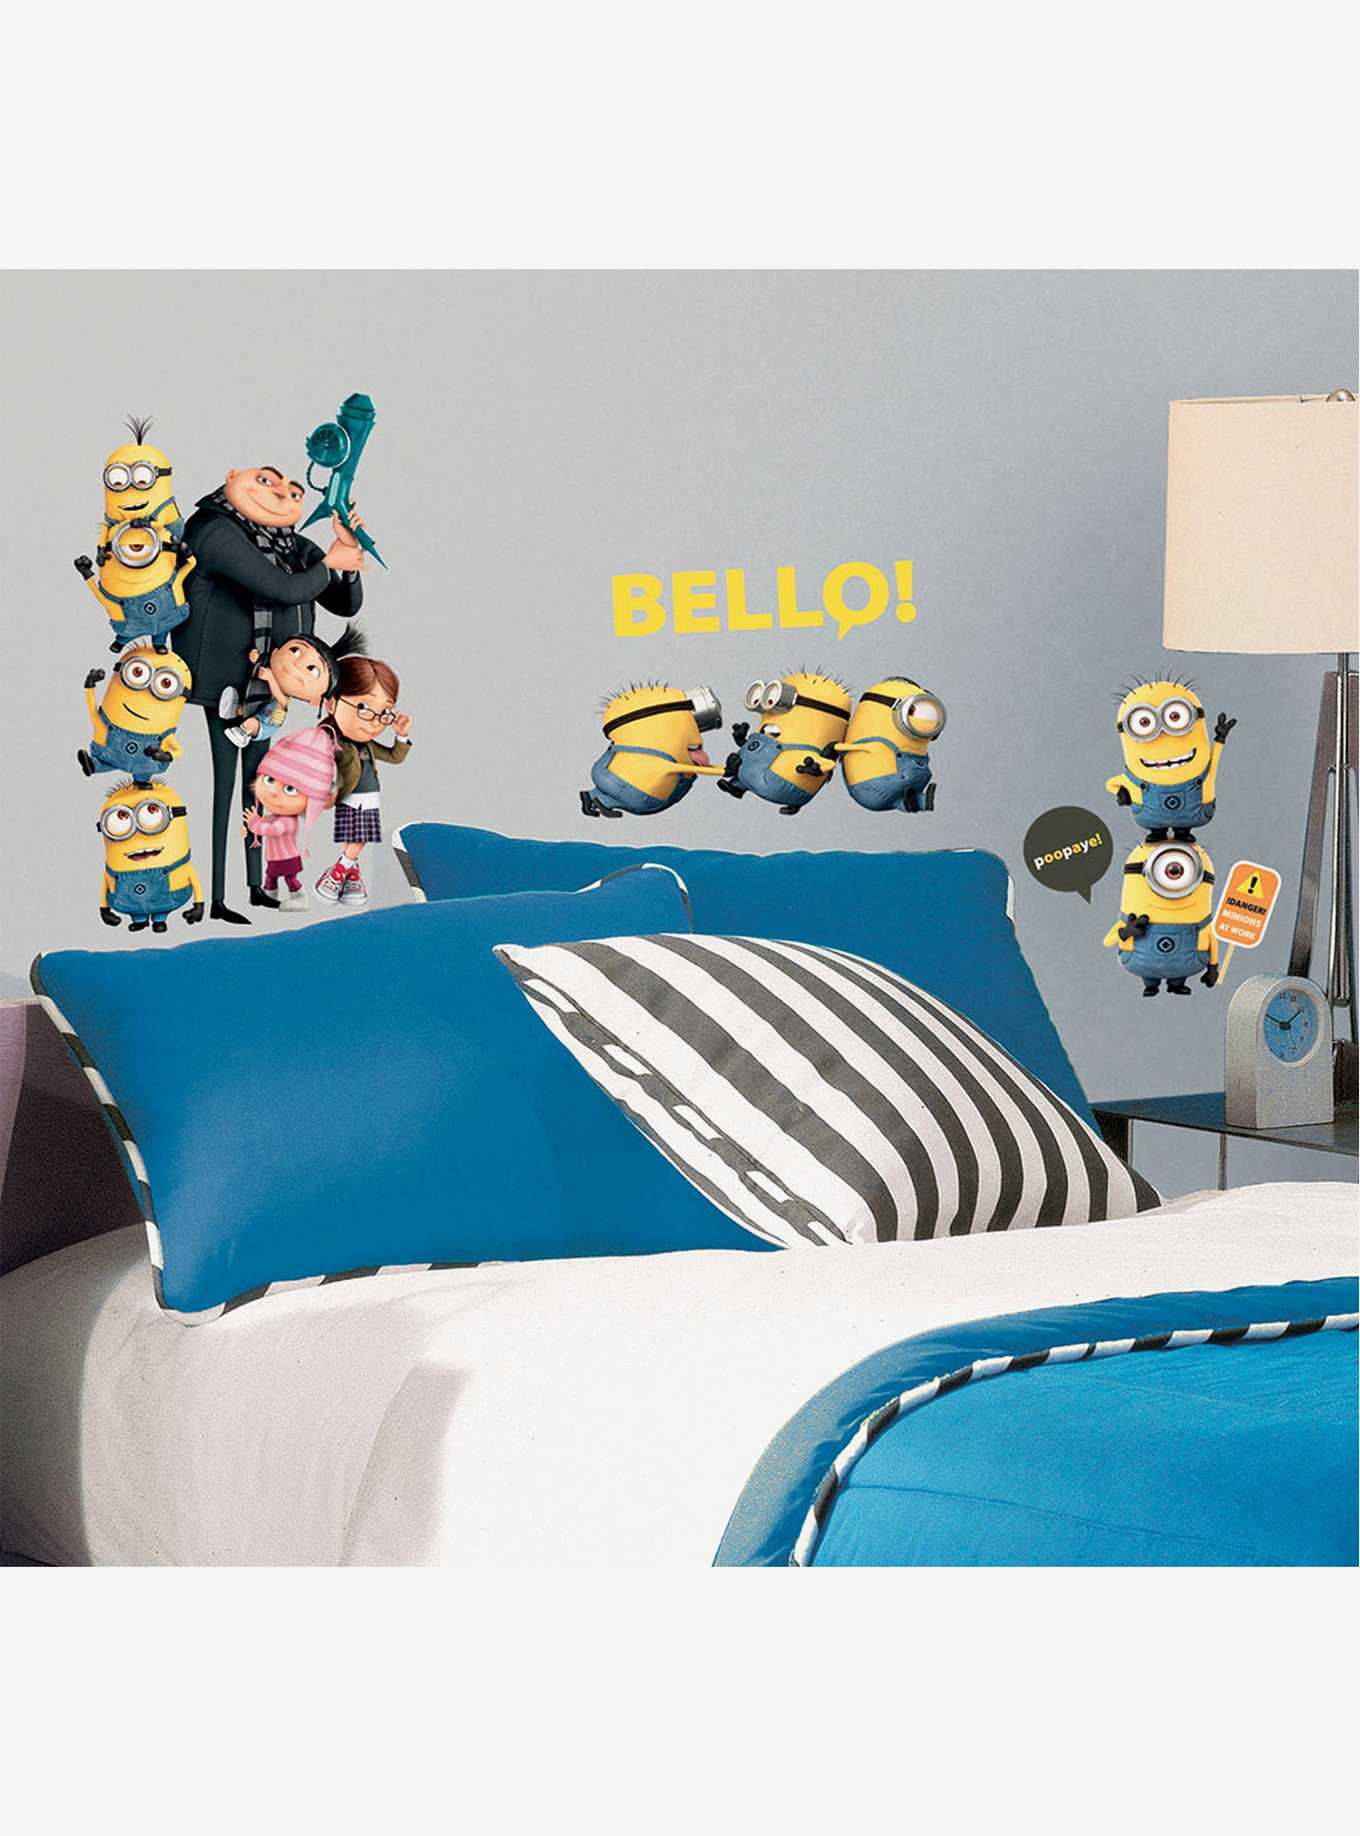 Minions Despicable Me 2 Peel And Stick Wall Decals, , hi-res